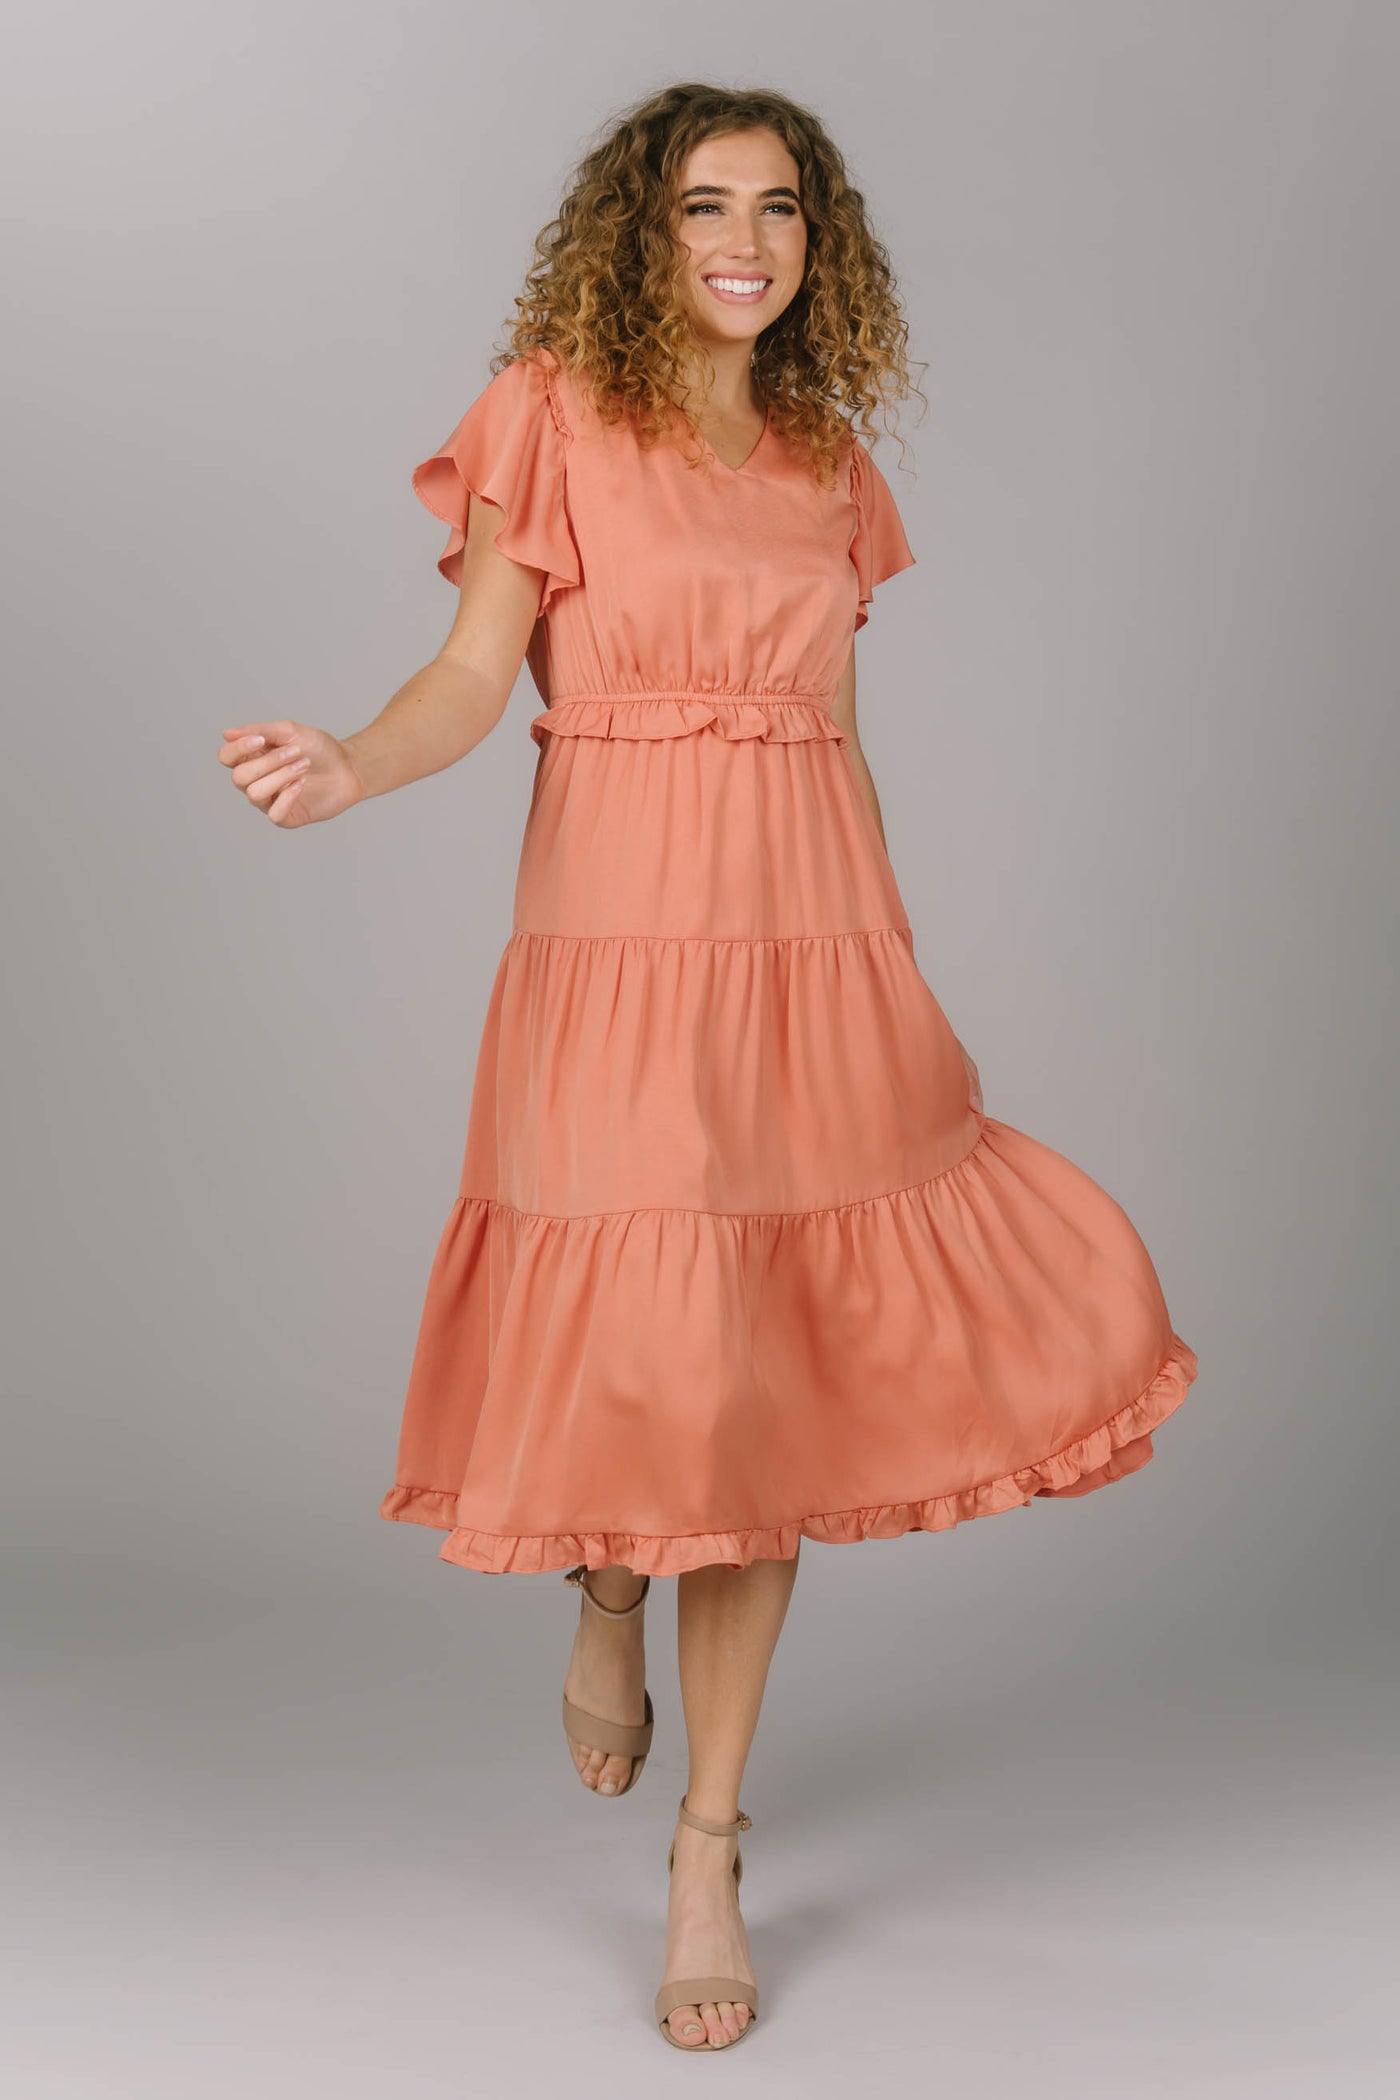 Front view of a peach modest bridesmaid dress. It has a v-neckline and flutter sleeves. Its draping and tiered skirt make for the perfect modest bridesmaid dress.